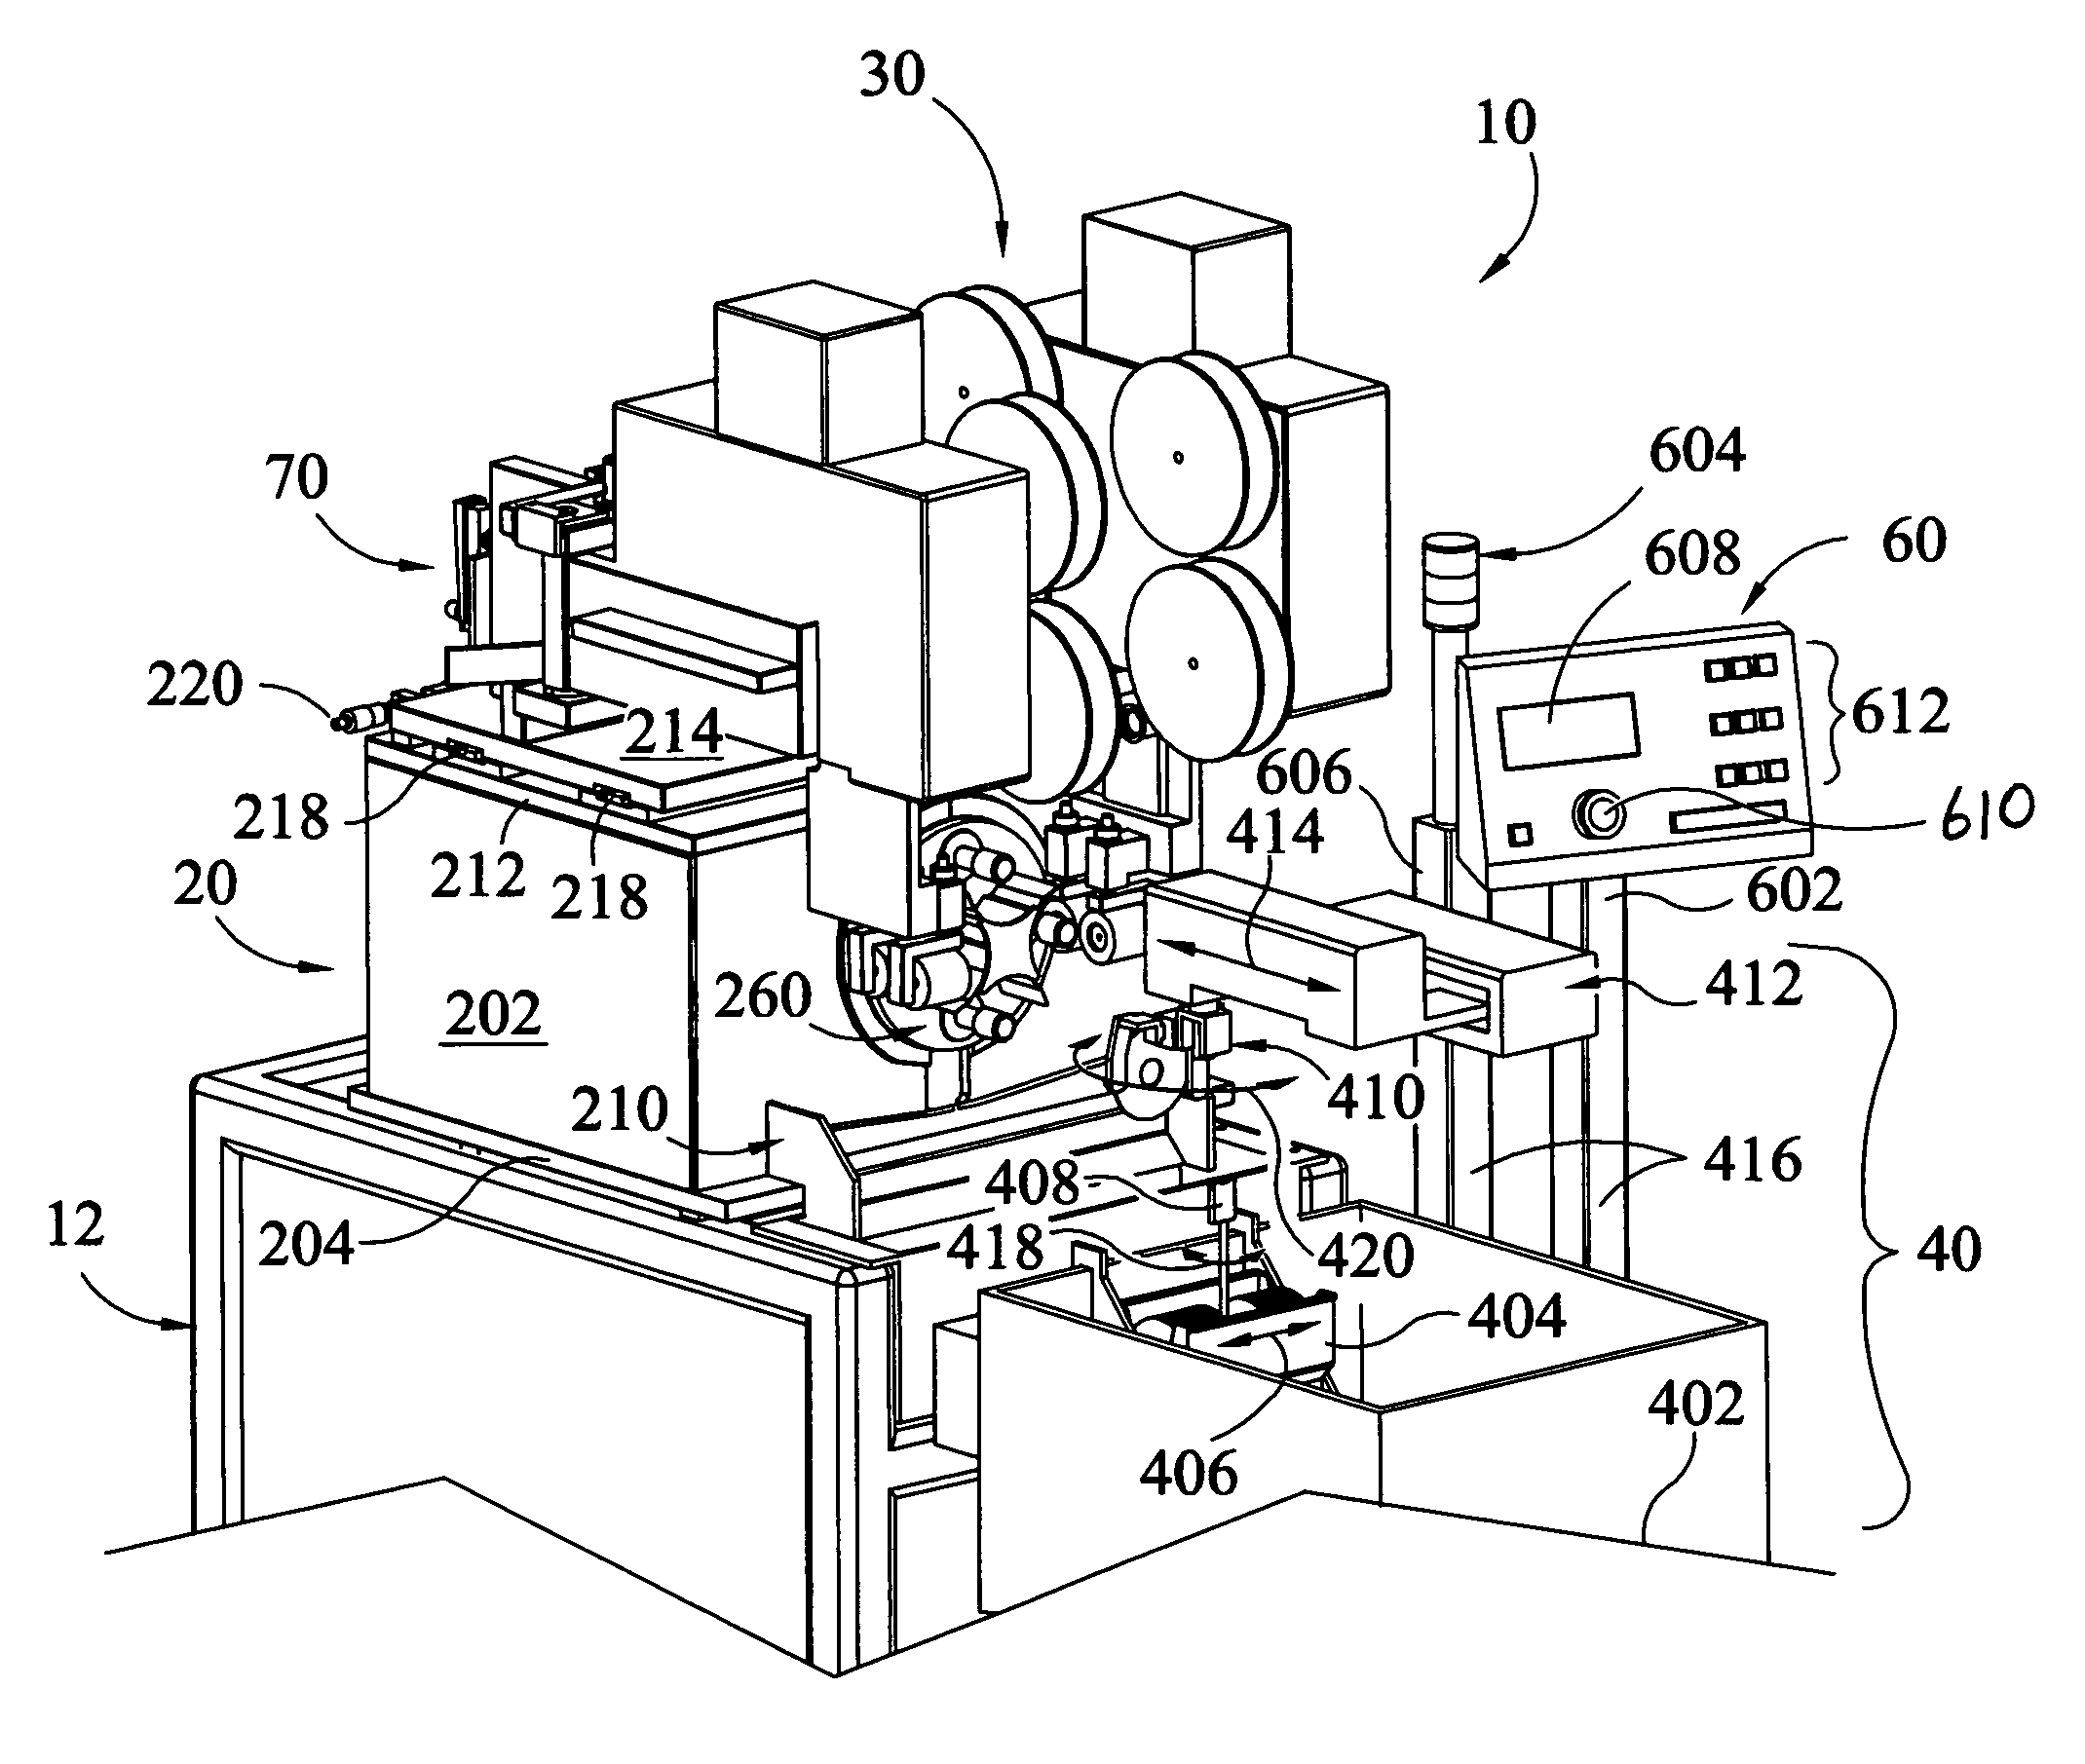 Multi-station disk finishing apparatus and method